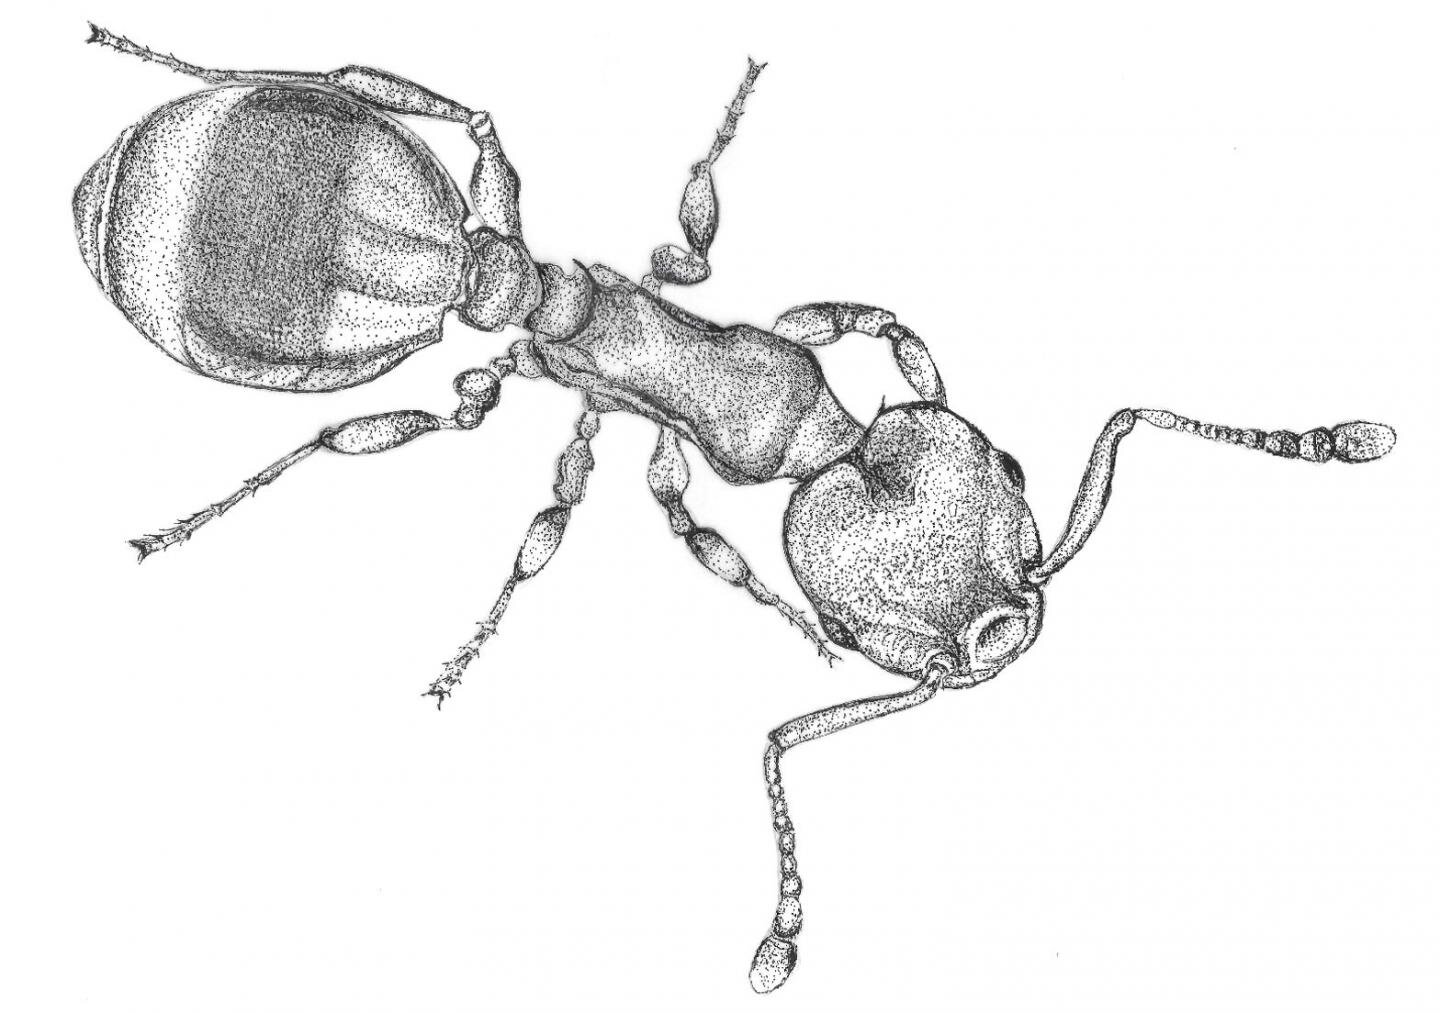 Ant responses to social isolation look like those of humans